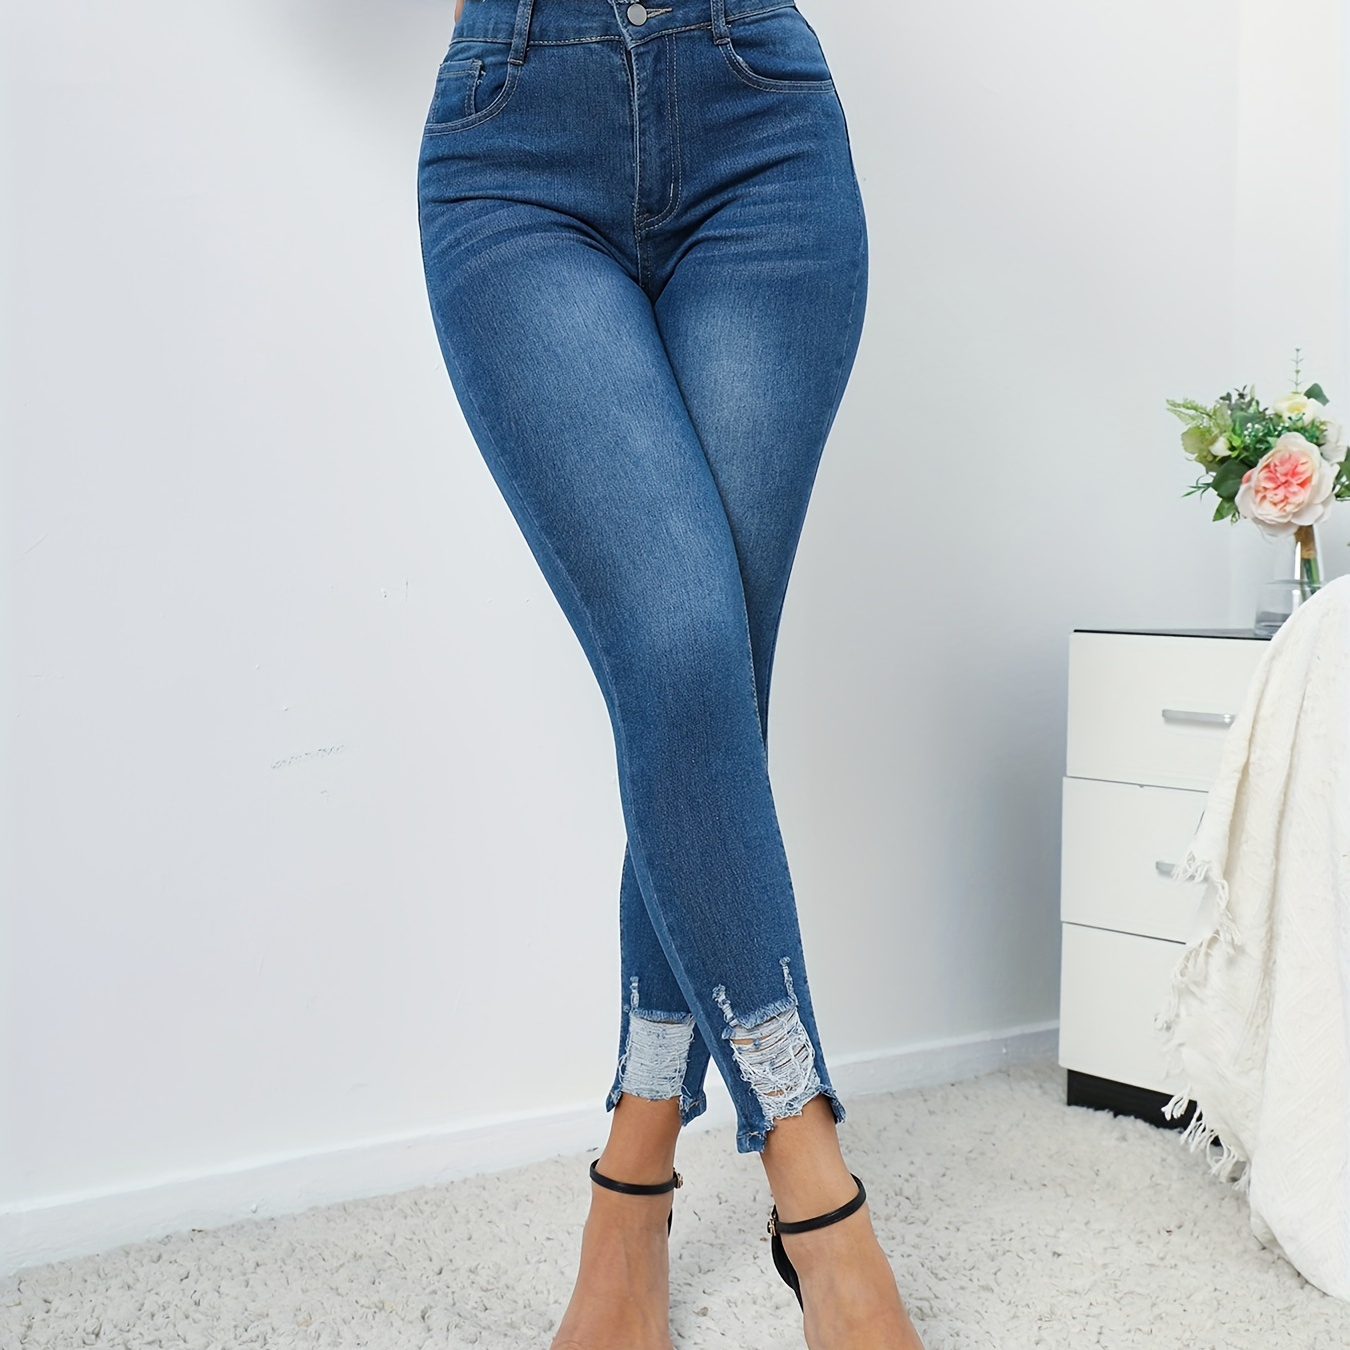 Blue * Trim Waist Skinny Jeans, Slim Fit Ripped Holes High Stretch Tight  Jeans, Women's Denim Jeans & Clothing